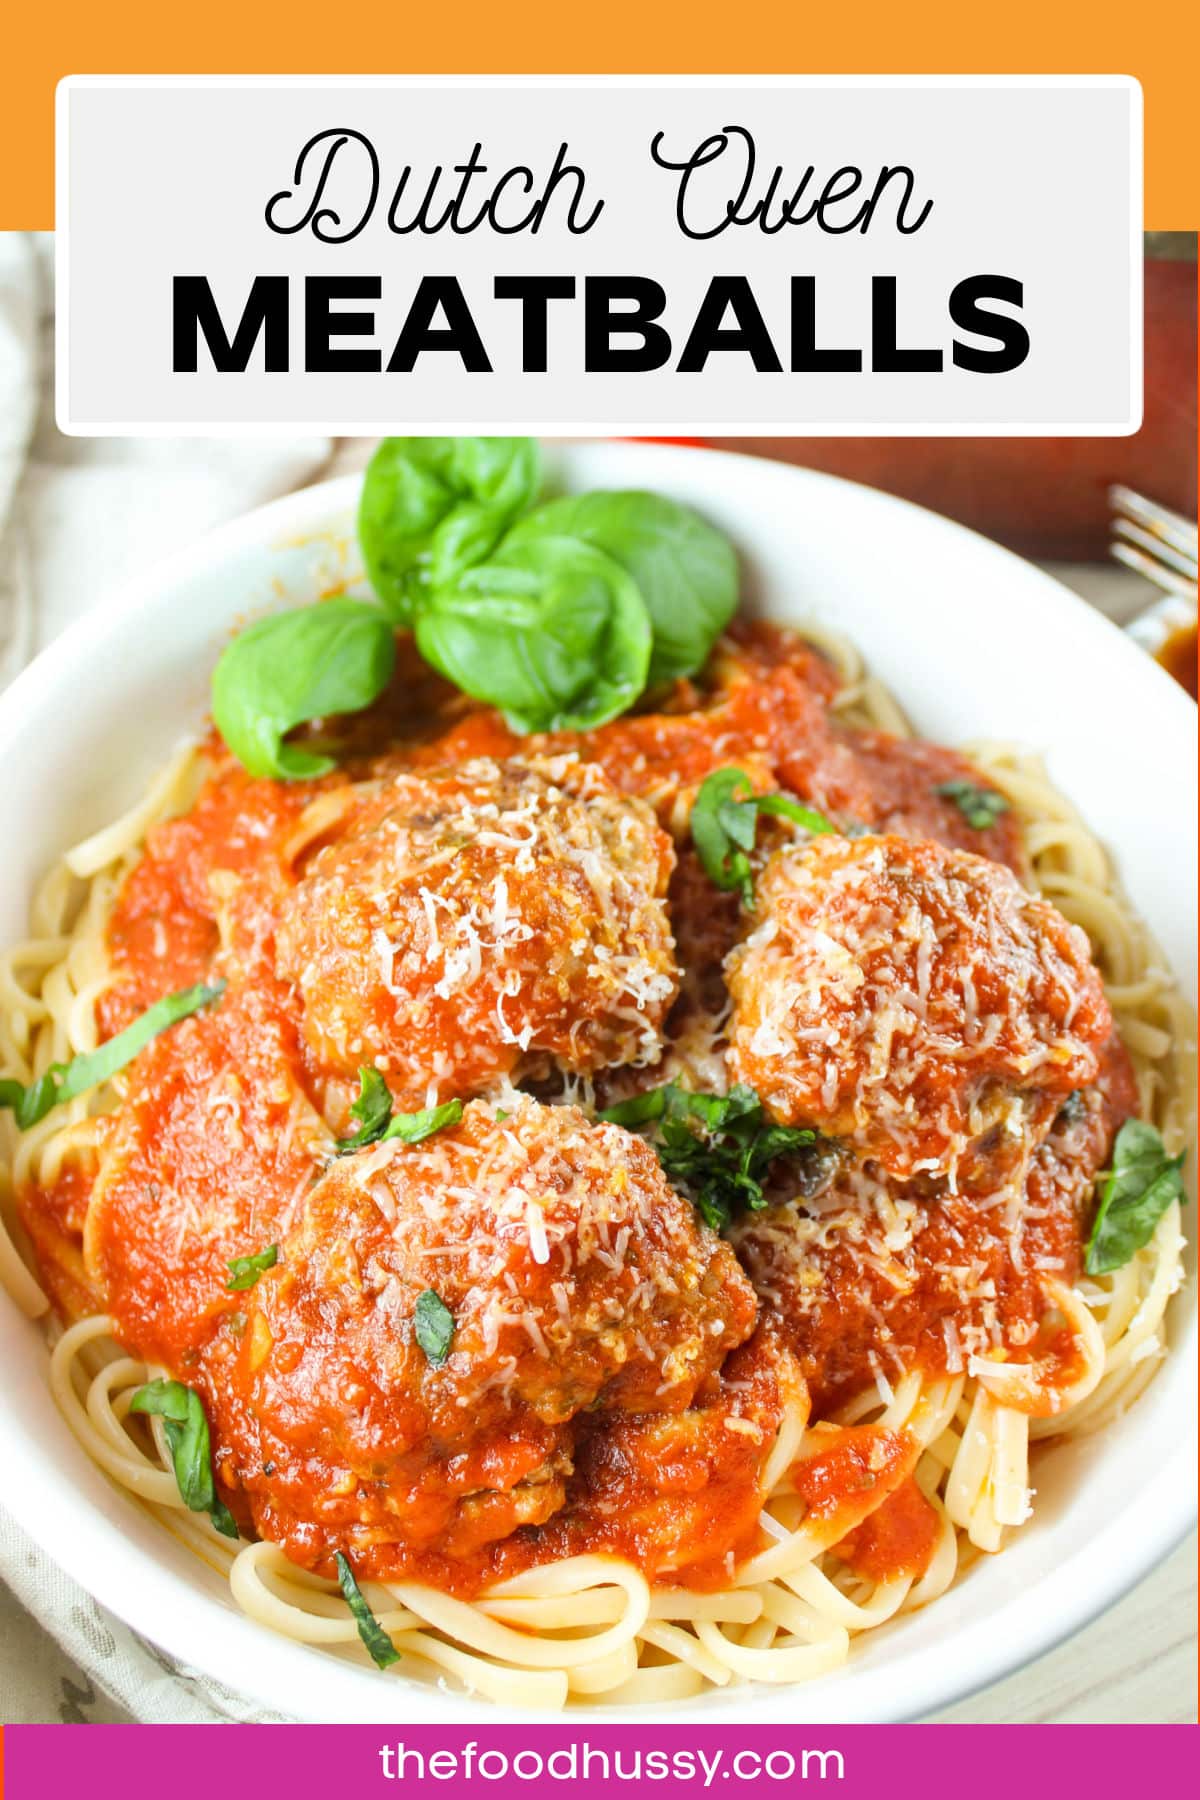 Tender meatballs simmered in a homemade Italian tomato sauce - all done in under an hour. These Dutch Oven Meatballs & Sauce are so delicious - your family will think you've been slaving away in the kitchen for hours!  via @foodhussy